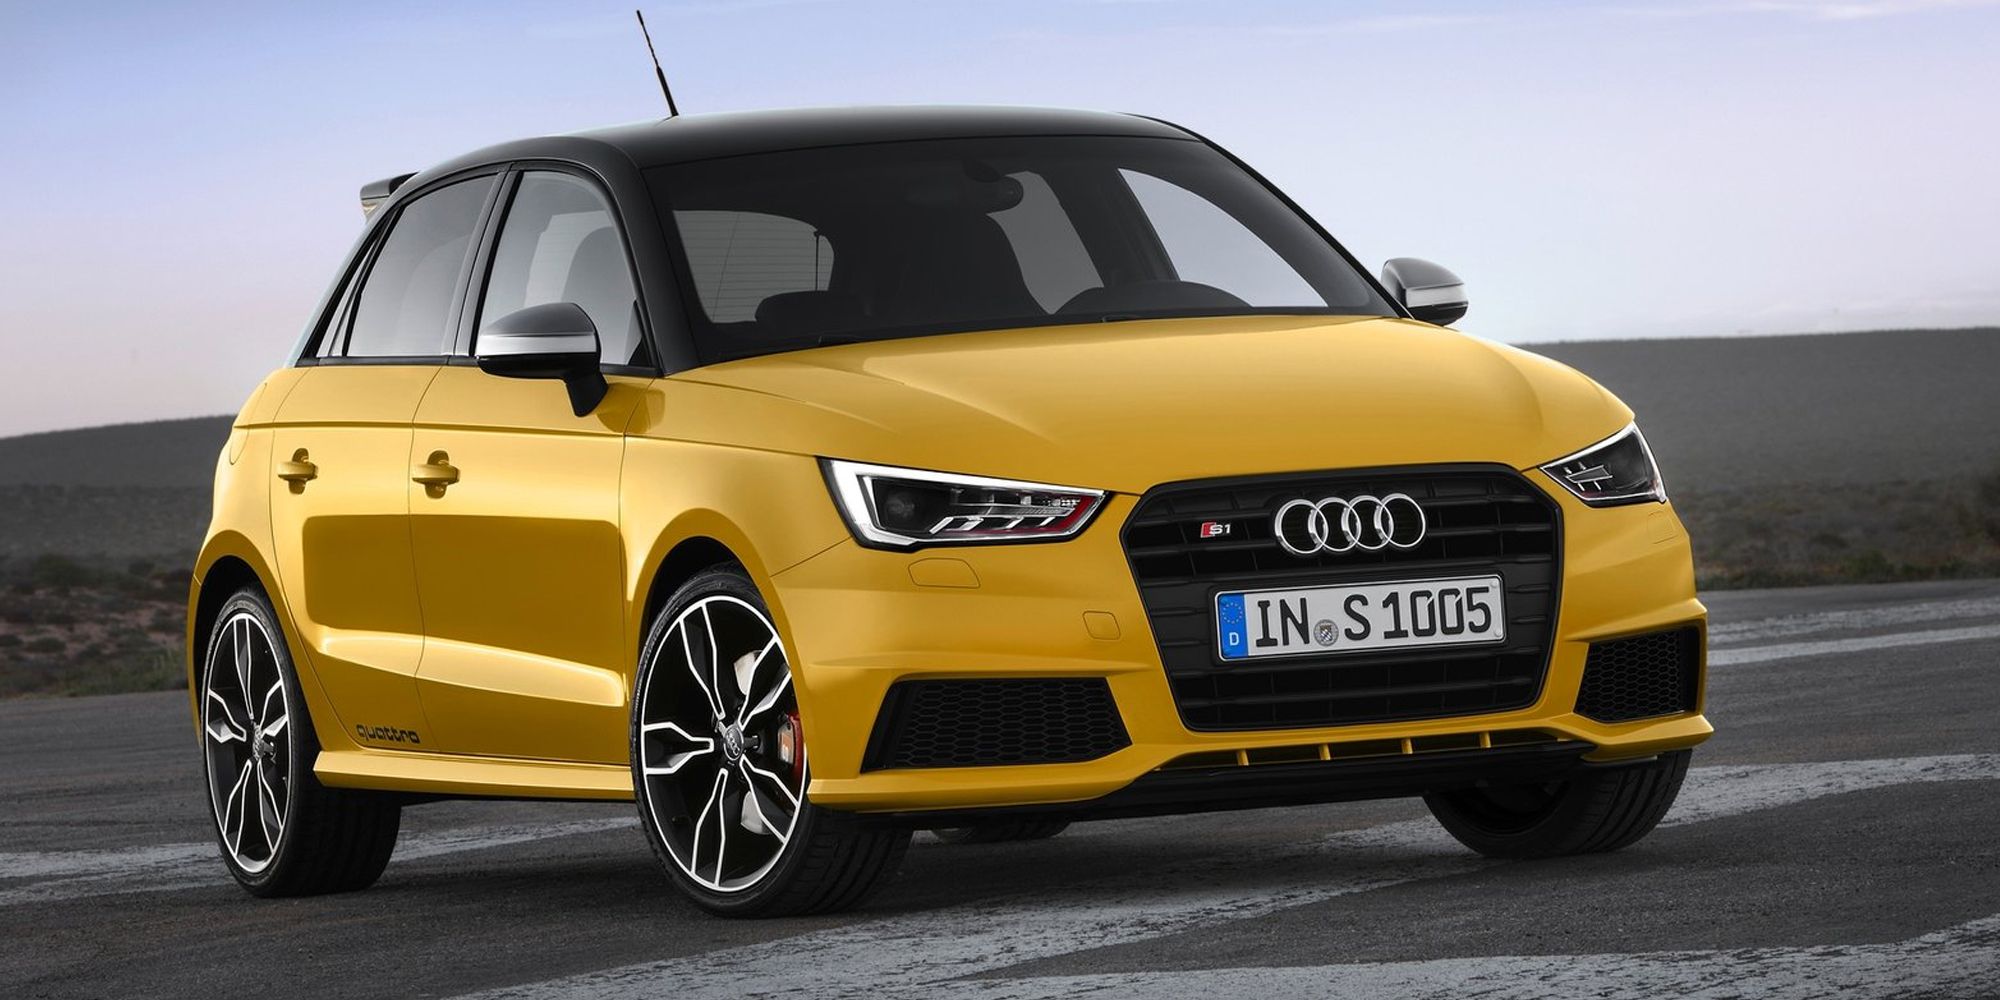 The front of the Audi S1